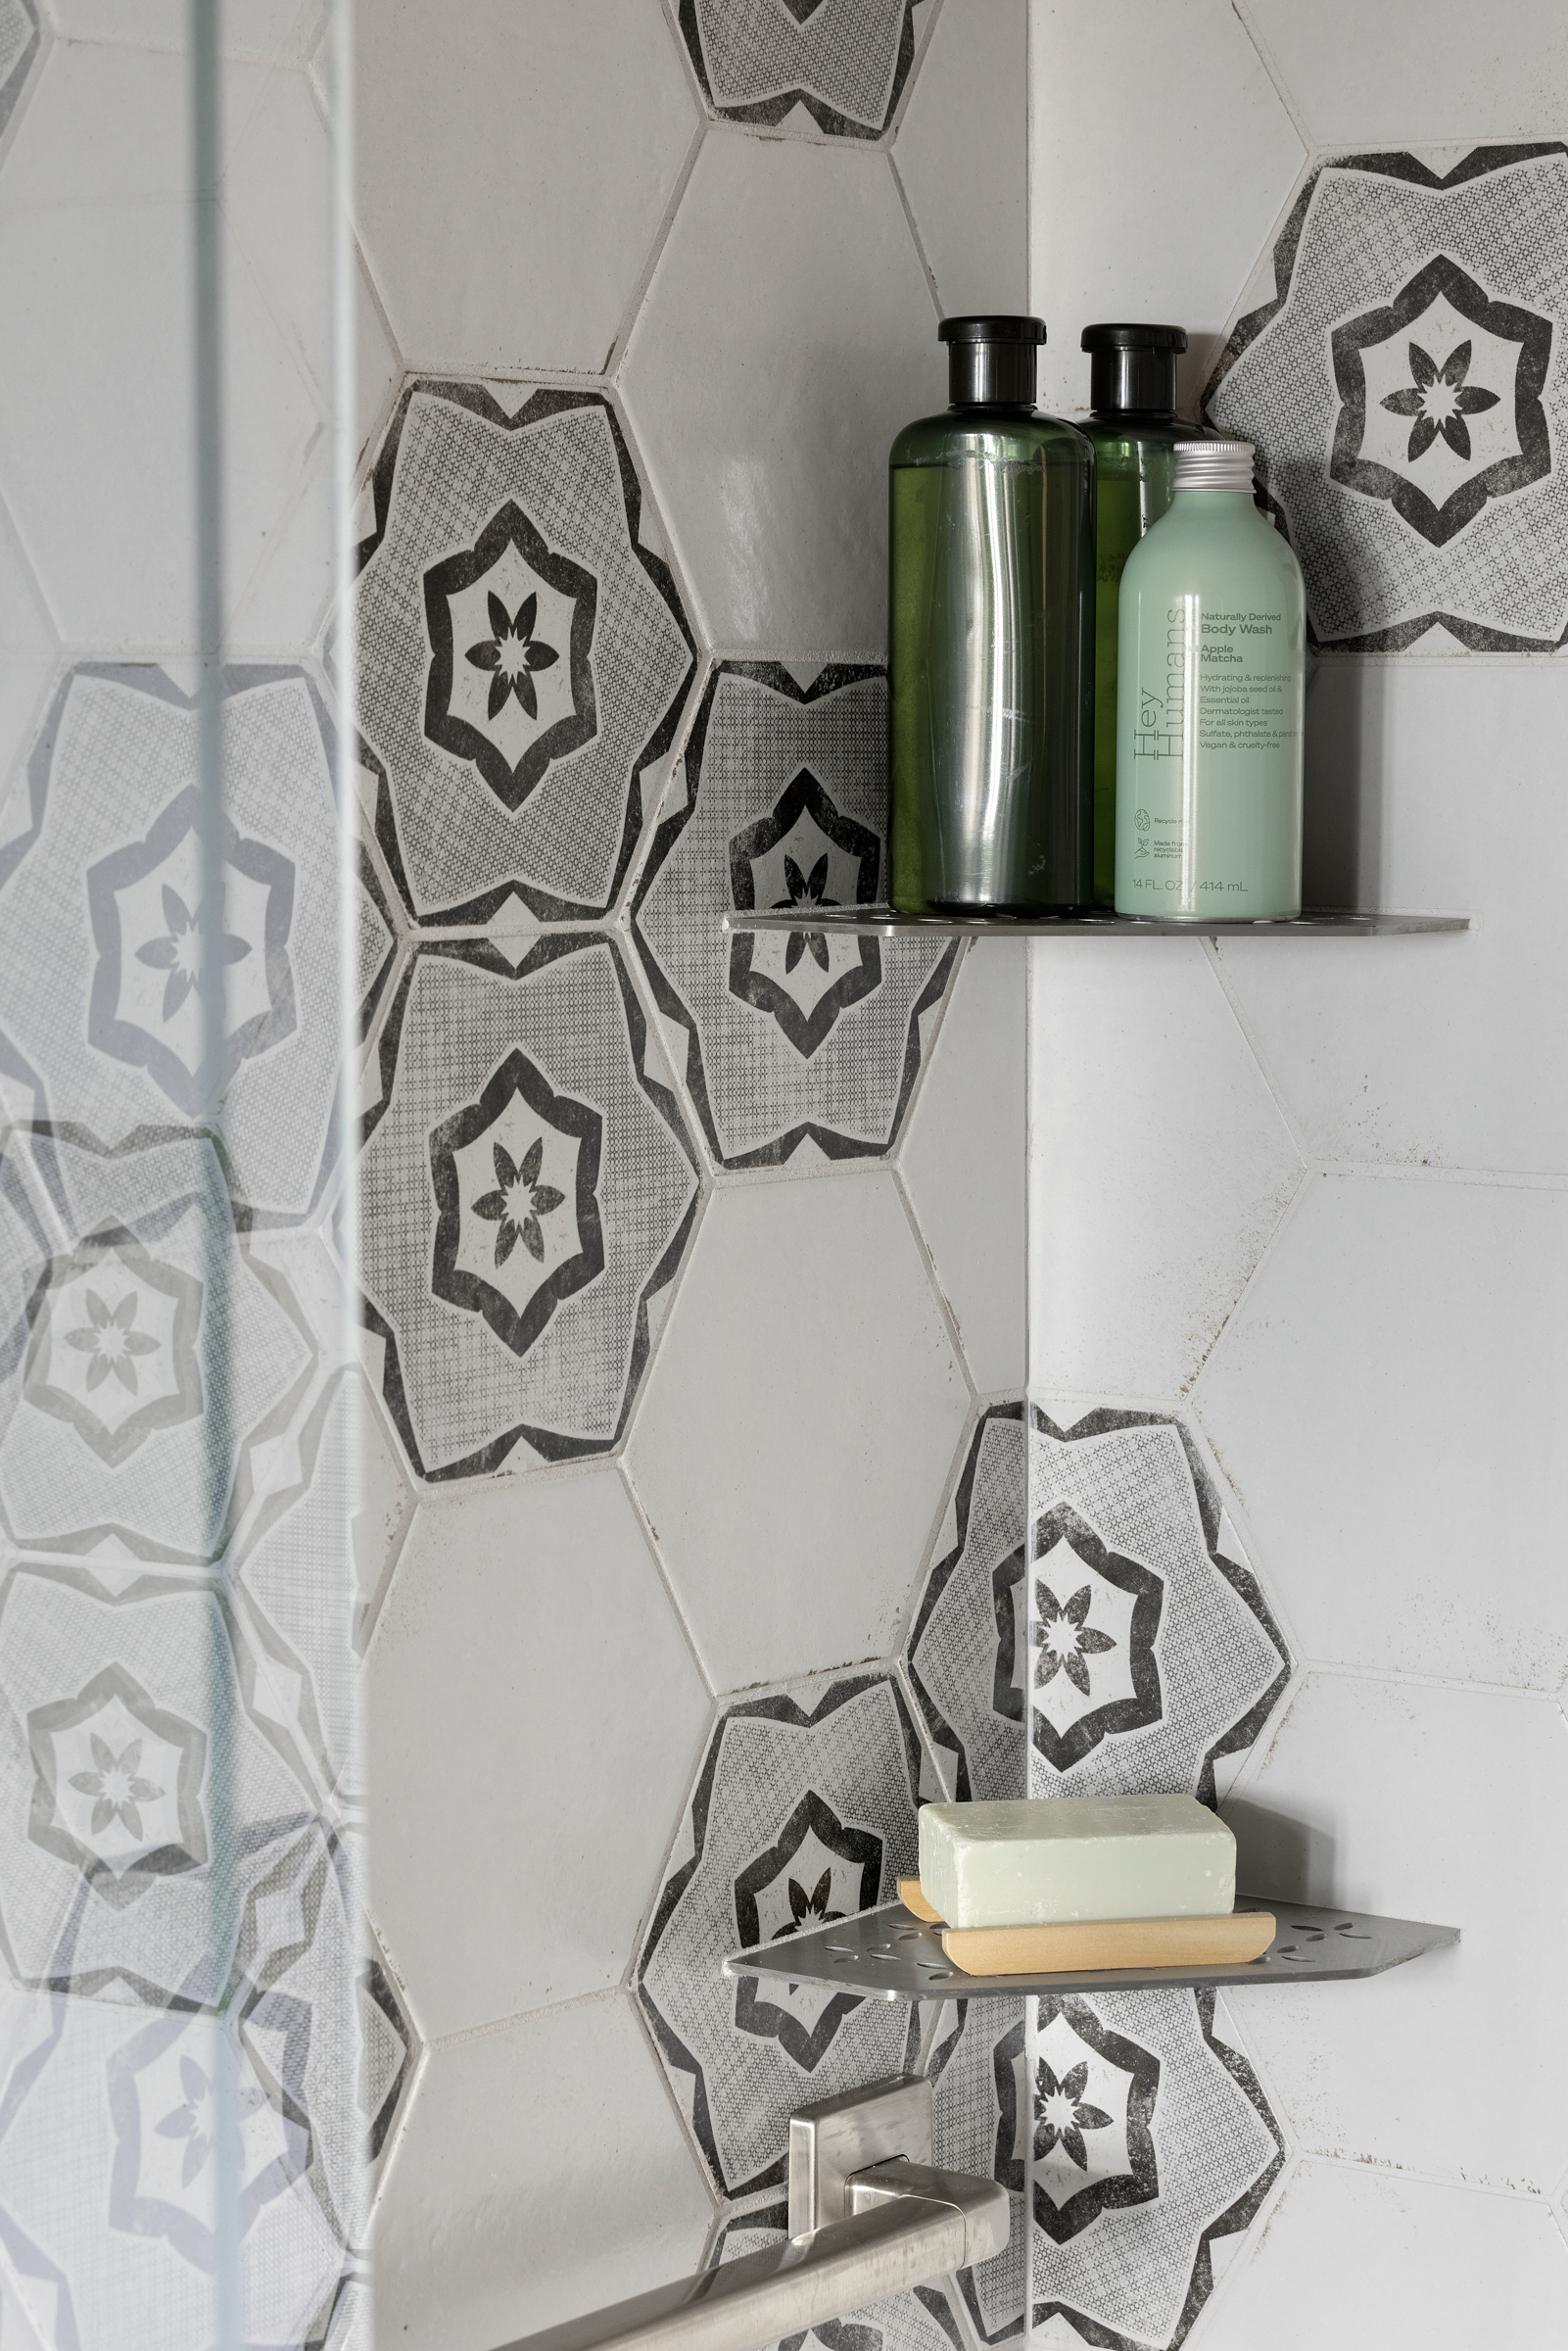 Bathroom renovation with hexagon shower tile and built in shelving